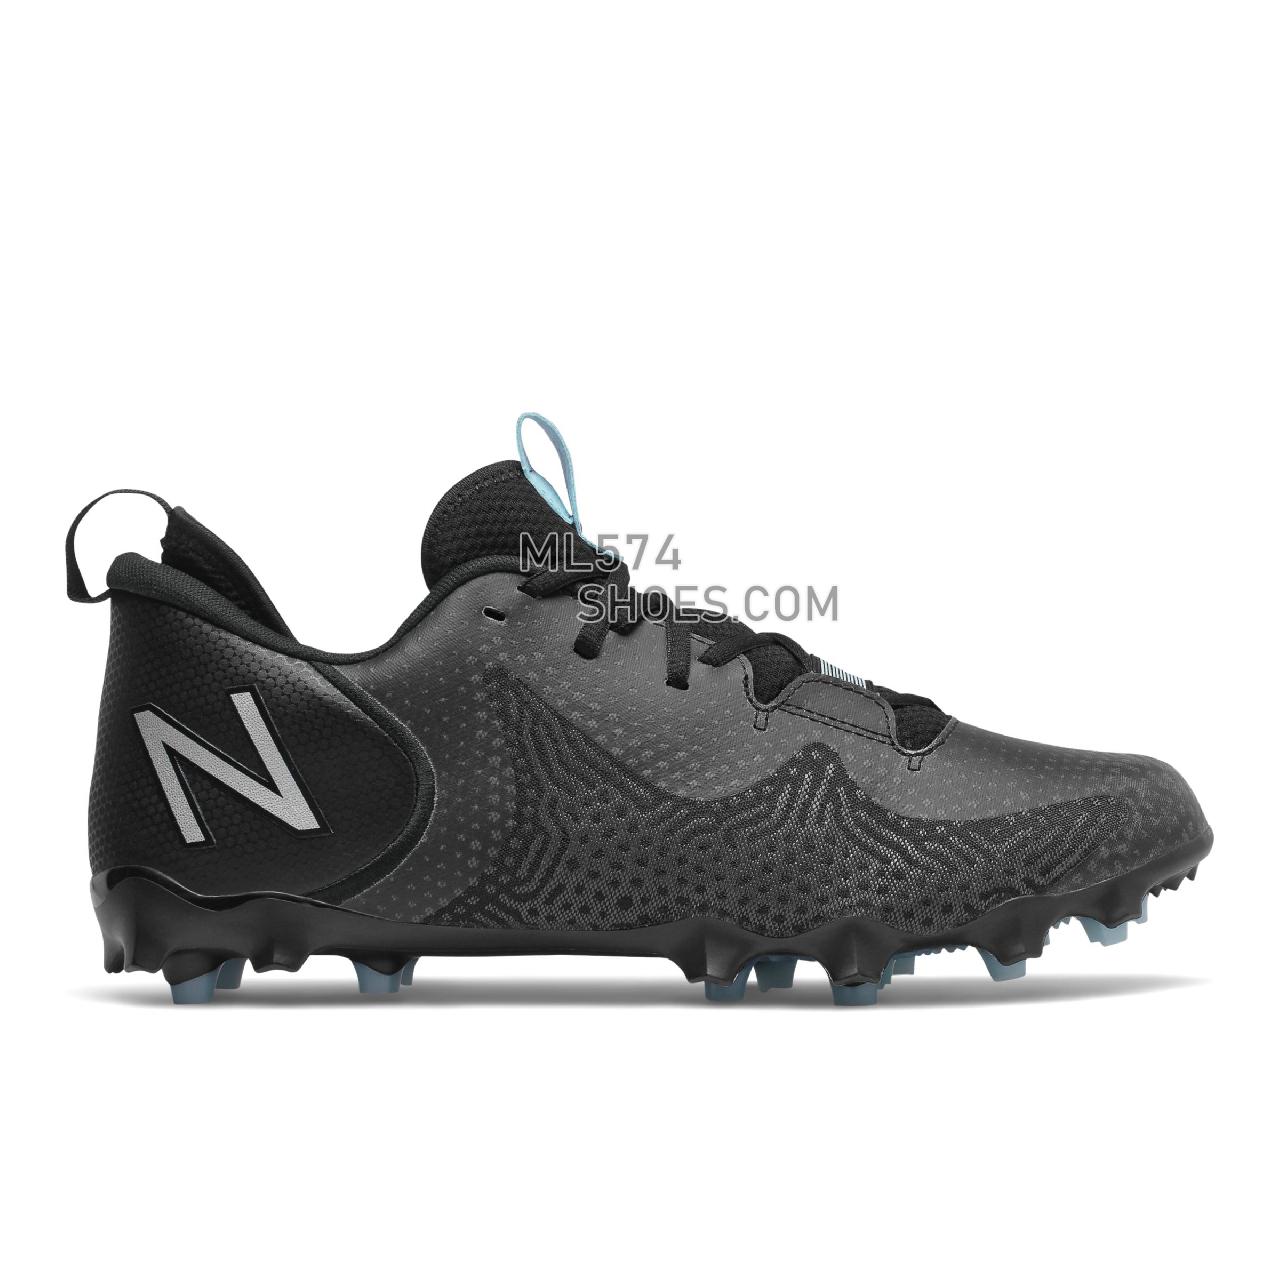 New Balance FreezeLX v3 Low - Men's Turf And Lacrosse Cleats - Black with Grey - FREEZLB3